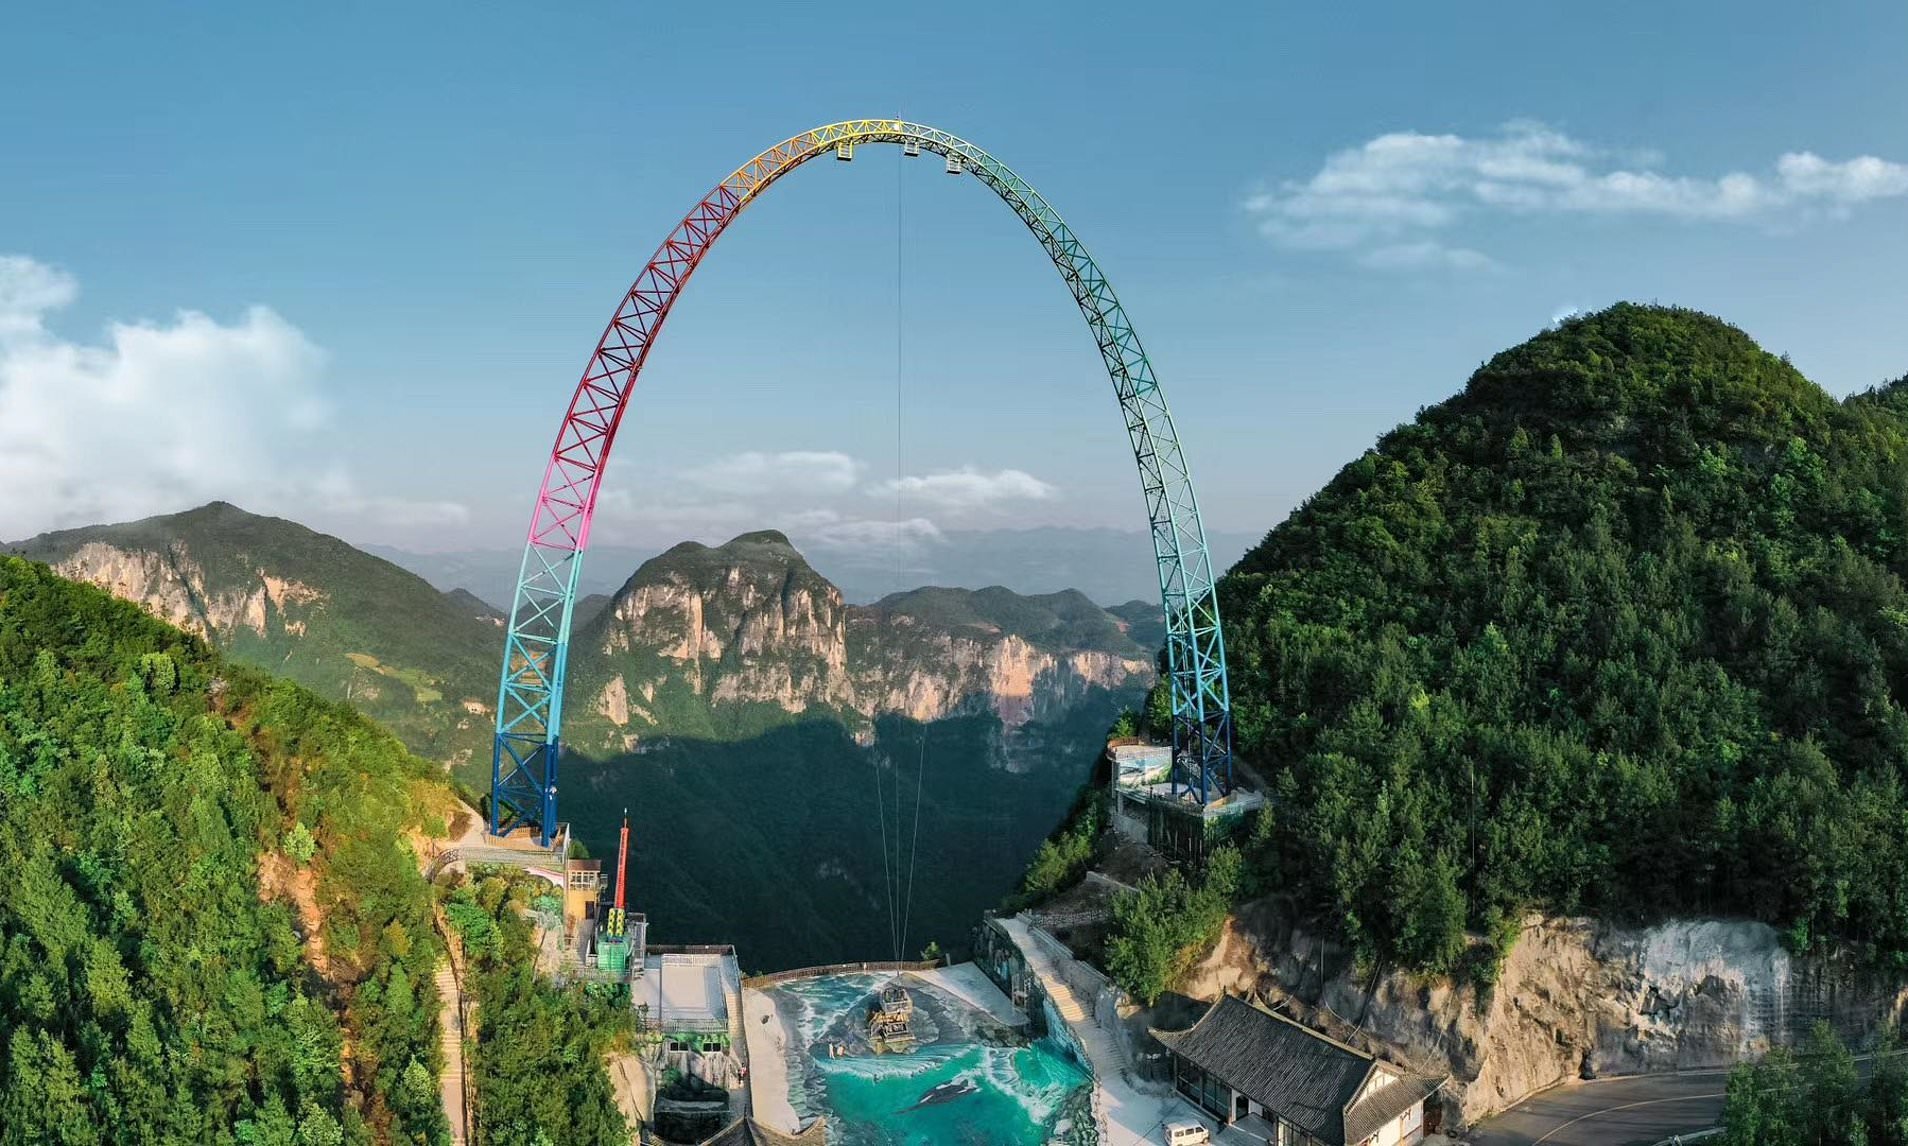 Standing 30 storeys tall – China has built the worlds largest and scariest swing